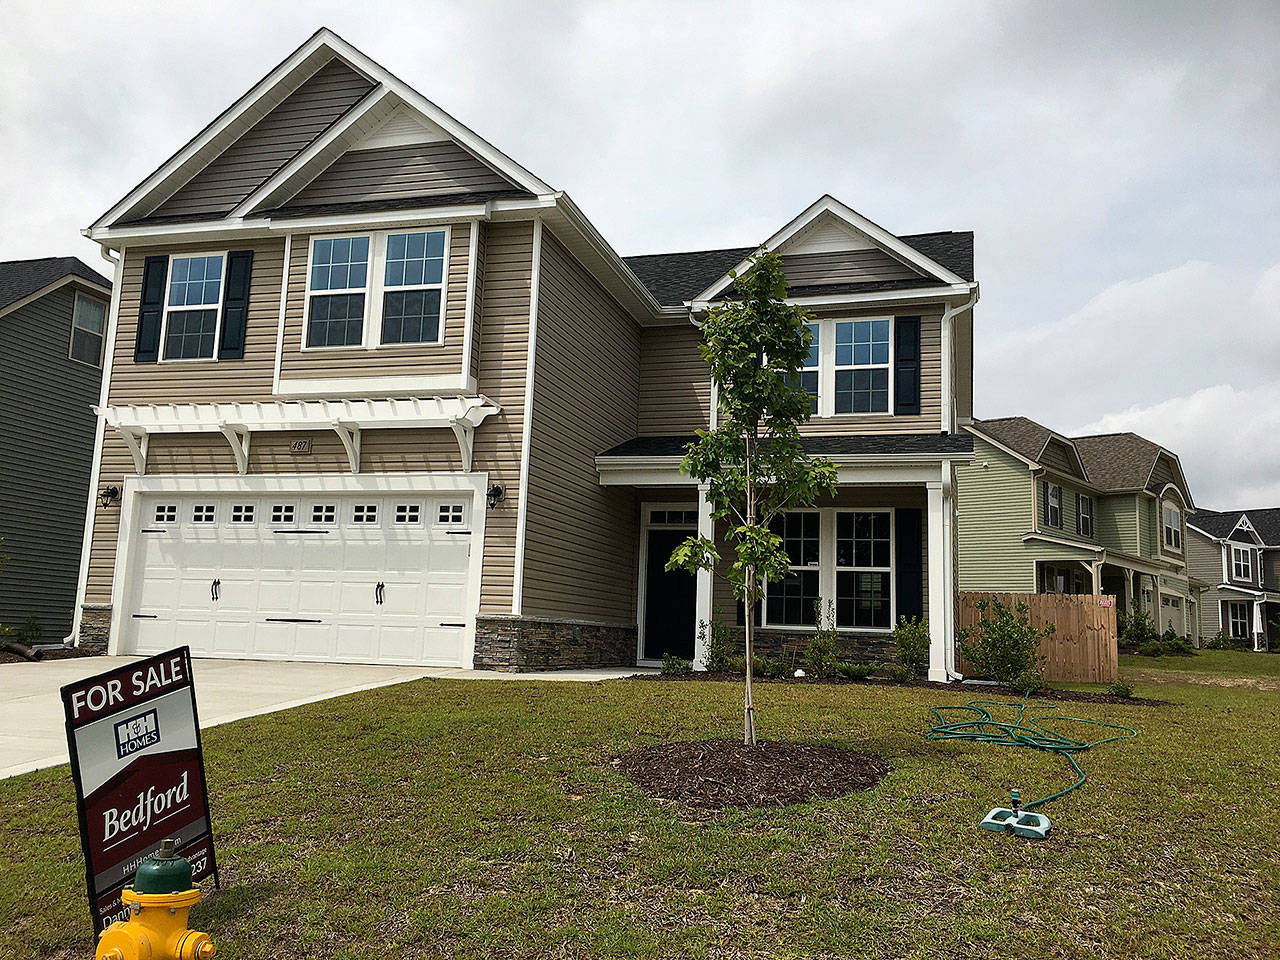 A new home for sale is seen in a housing development in Raeford, North Carolina, in September. (AP Photo/Swayne Hall)